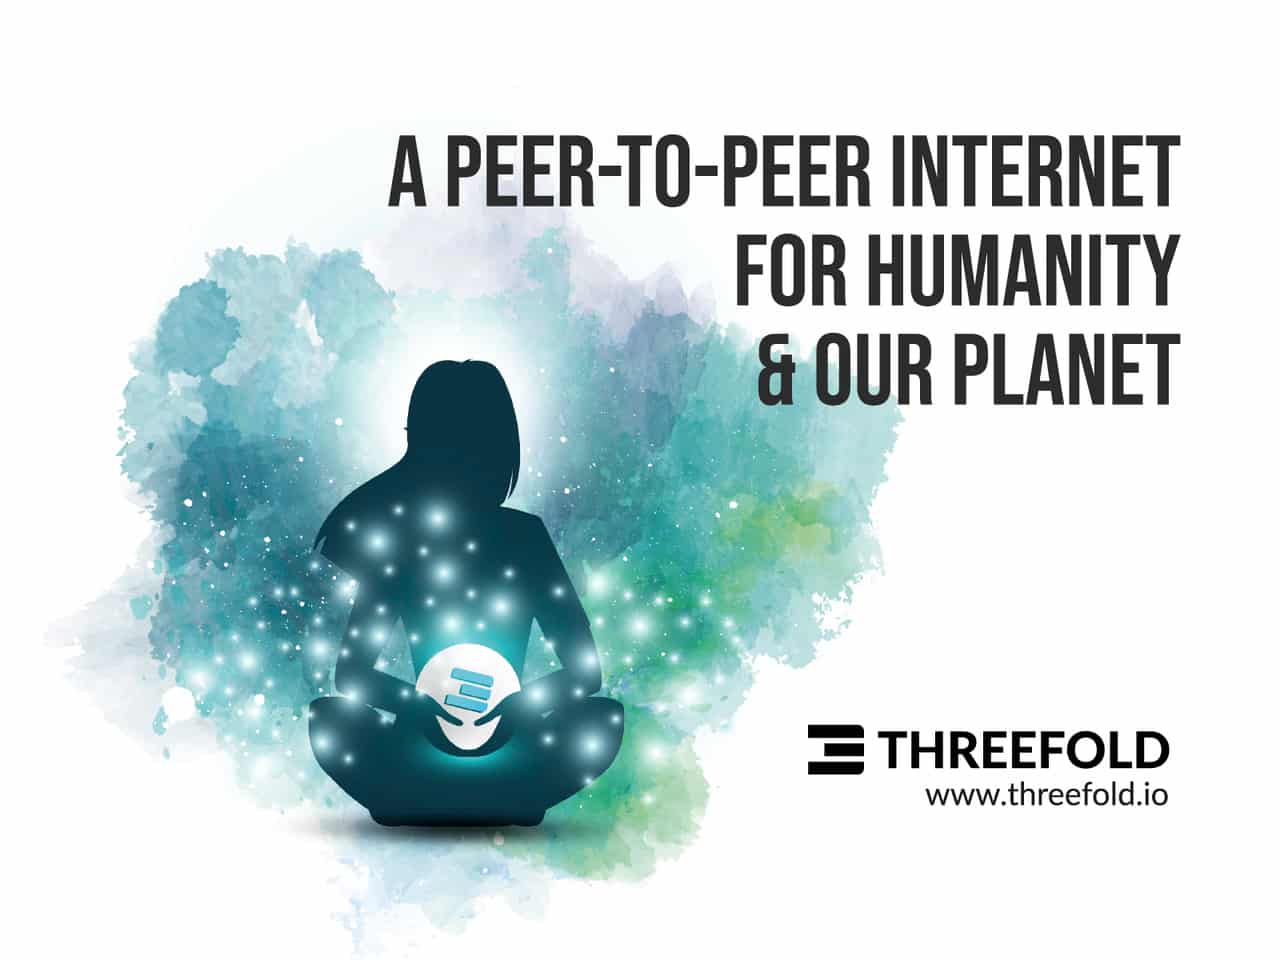 THREEFOLD LAYS THE FOUNDATION FOR A TRUE PEER-TO-PEER INTERNET